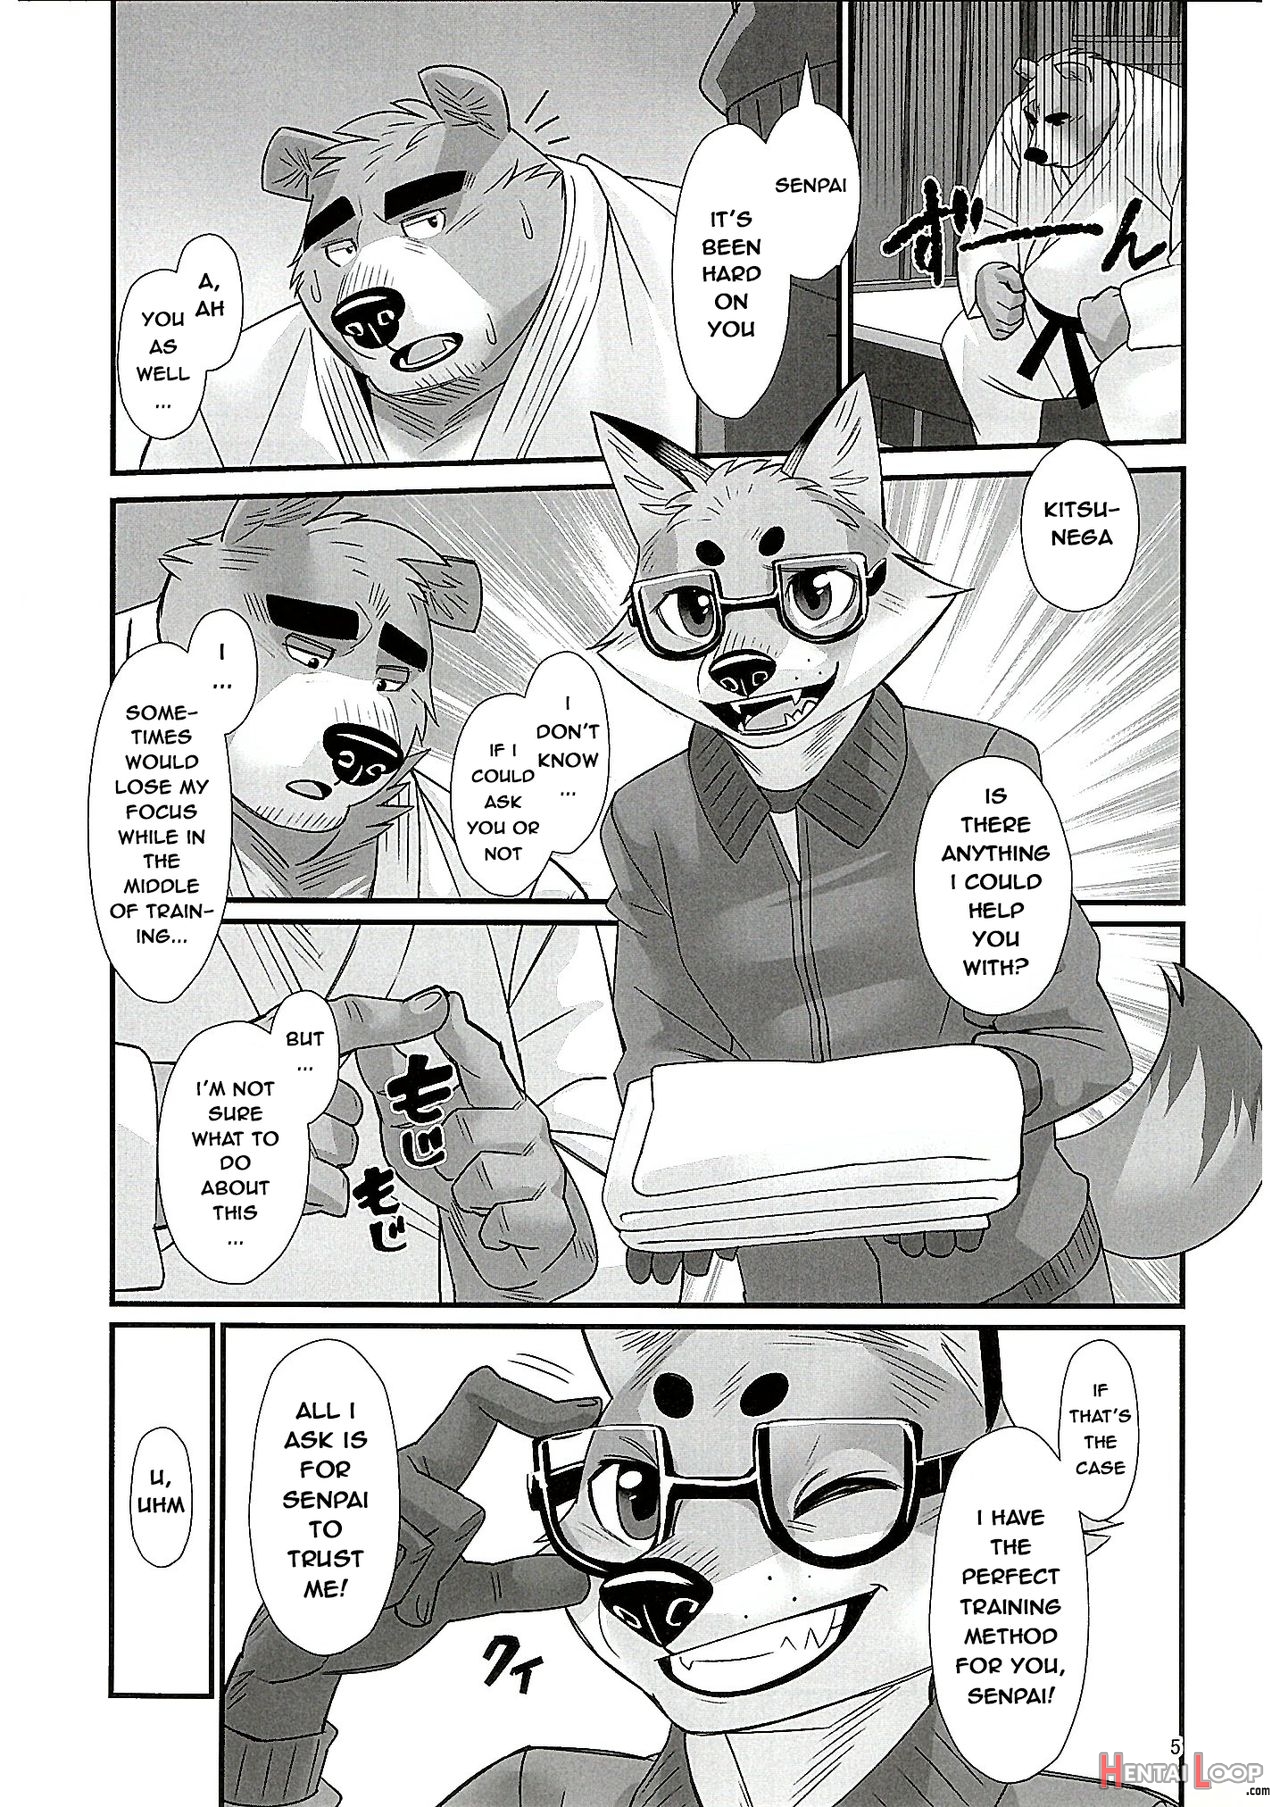 Mental Training page 4